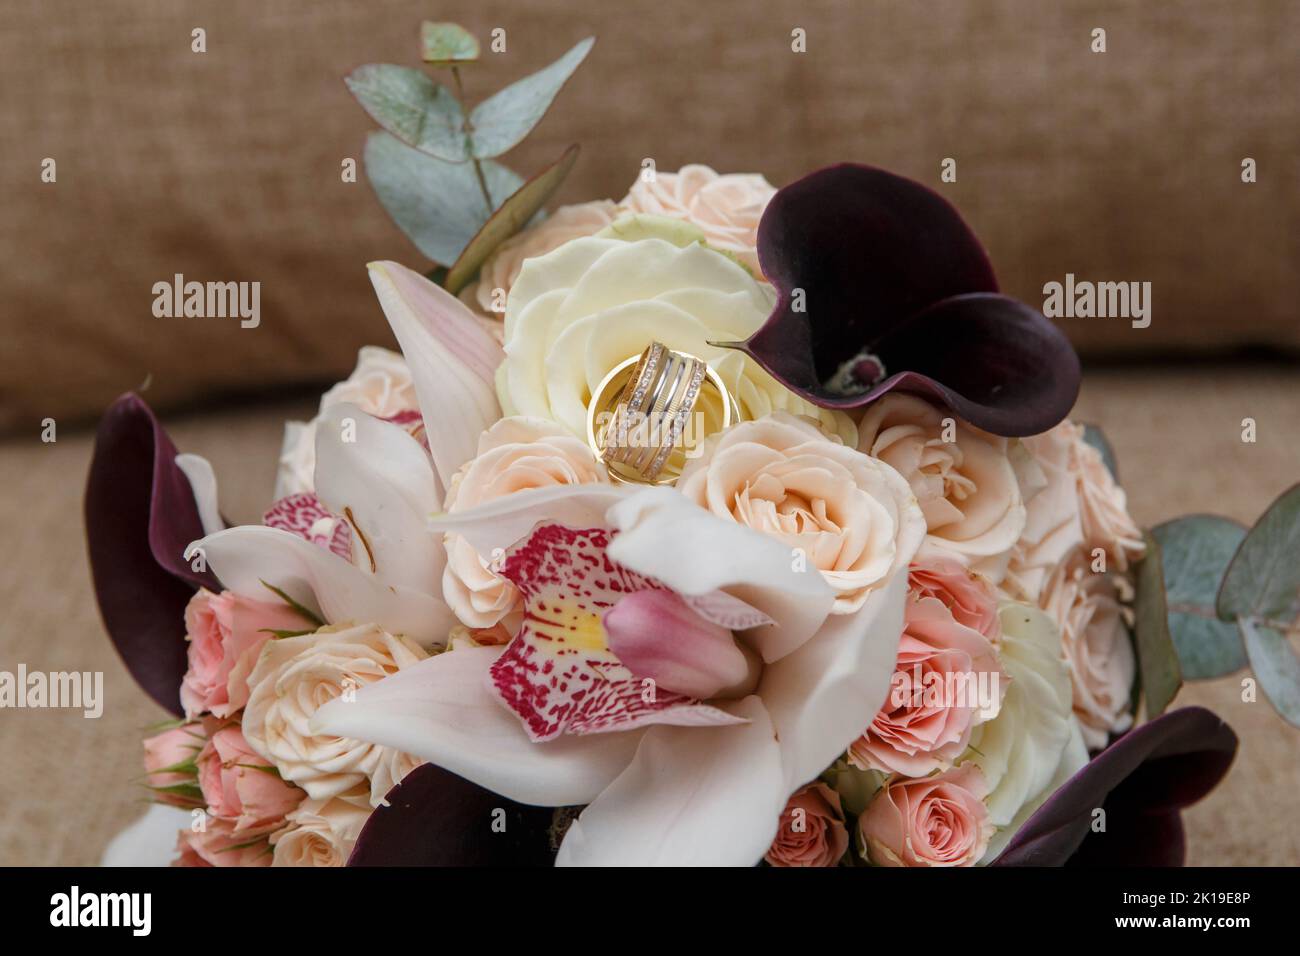 Wedding bouquet and rings closeup Stock Photo